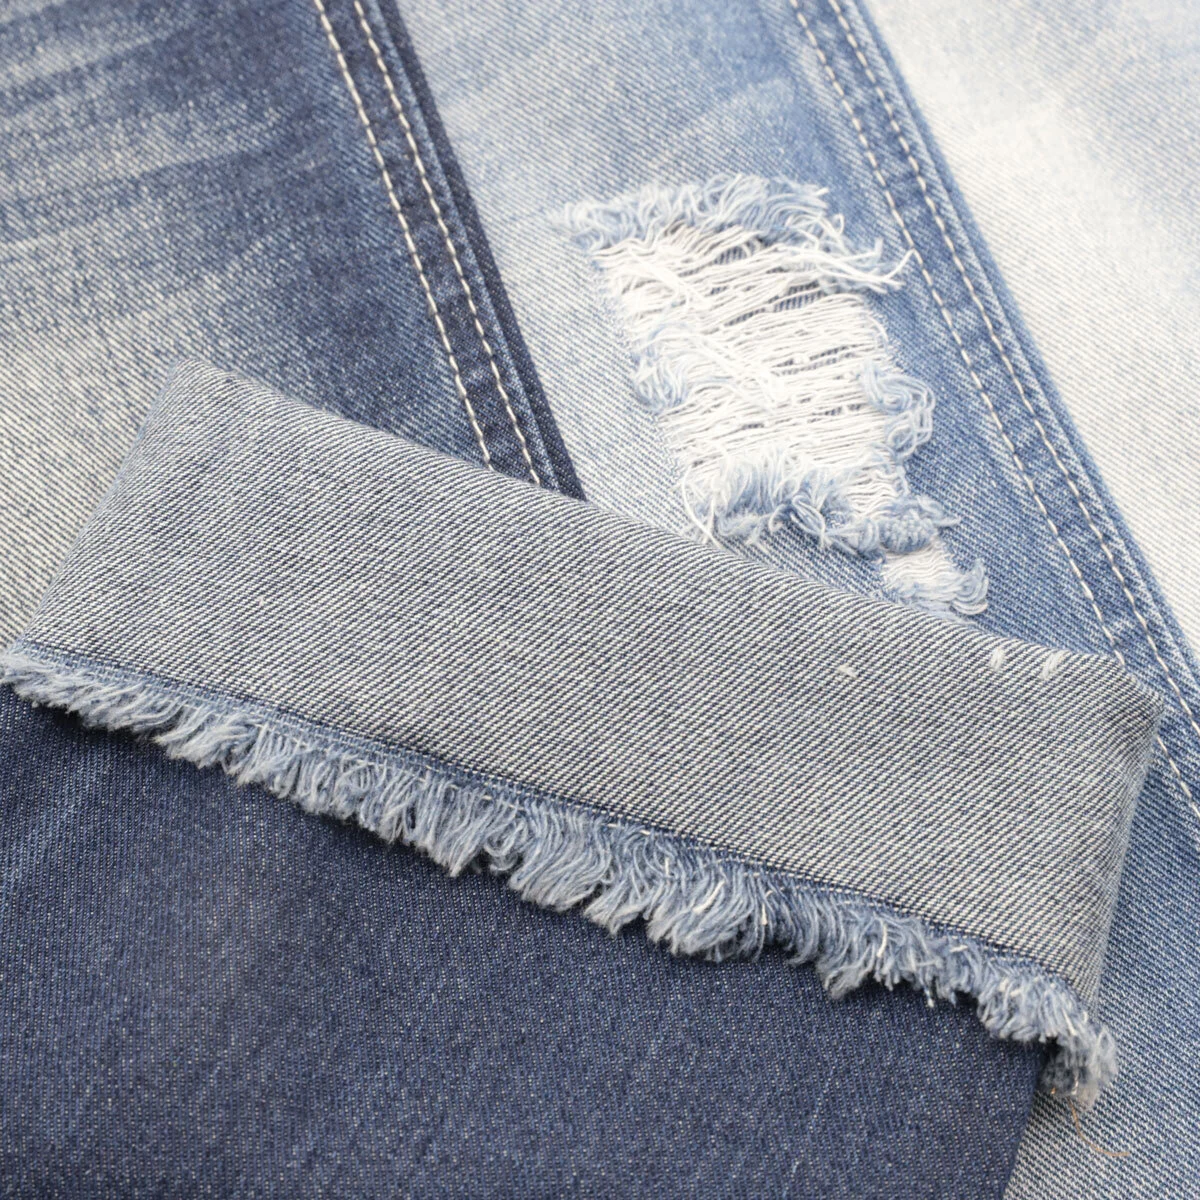 200A-9  75%cotton  14%polyester  11%viscose  Non stretch denim fabric with low price 2